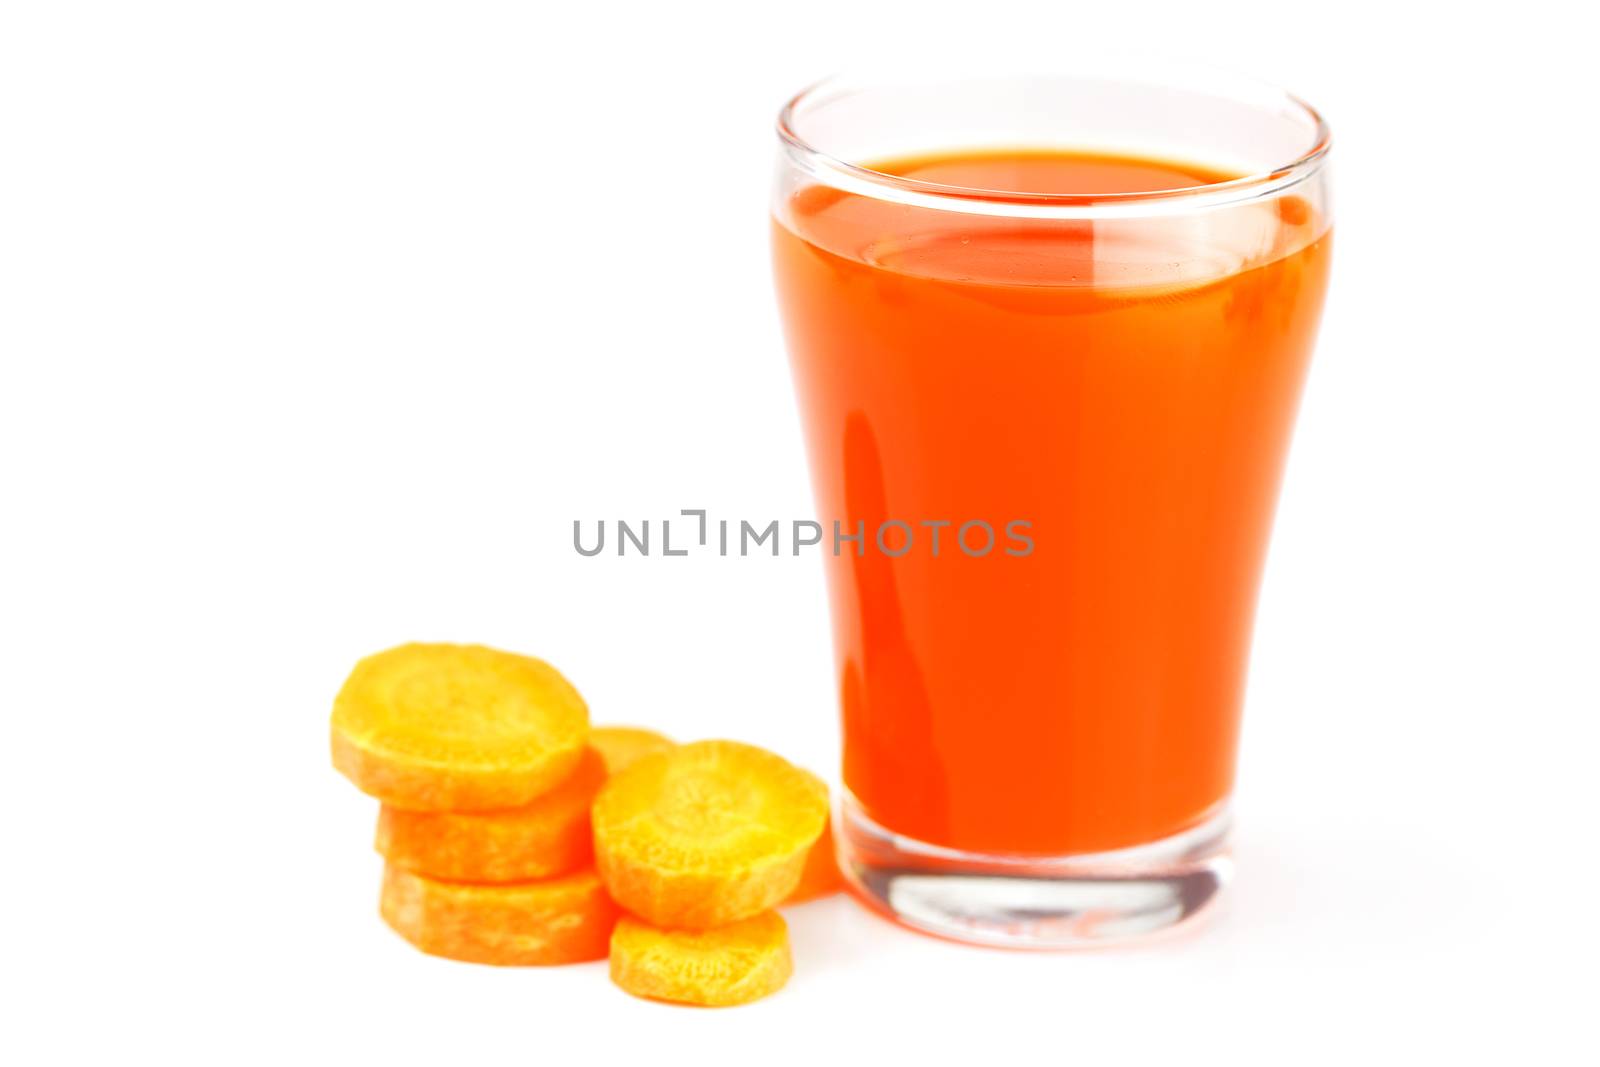 carrot and a glass of carrot juice isolated on white